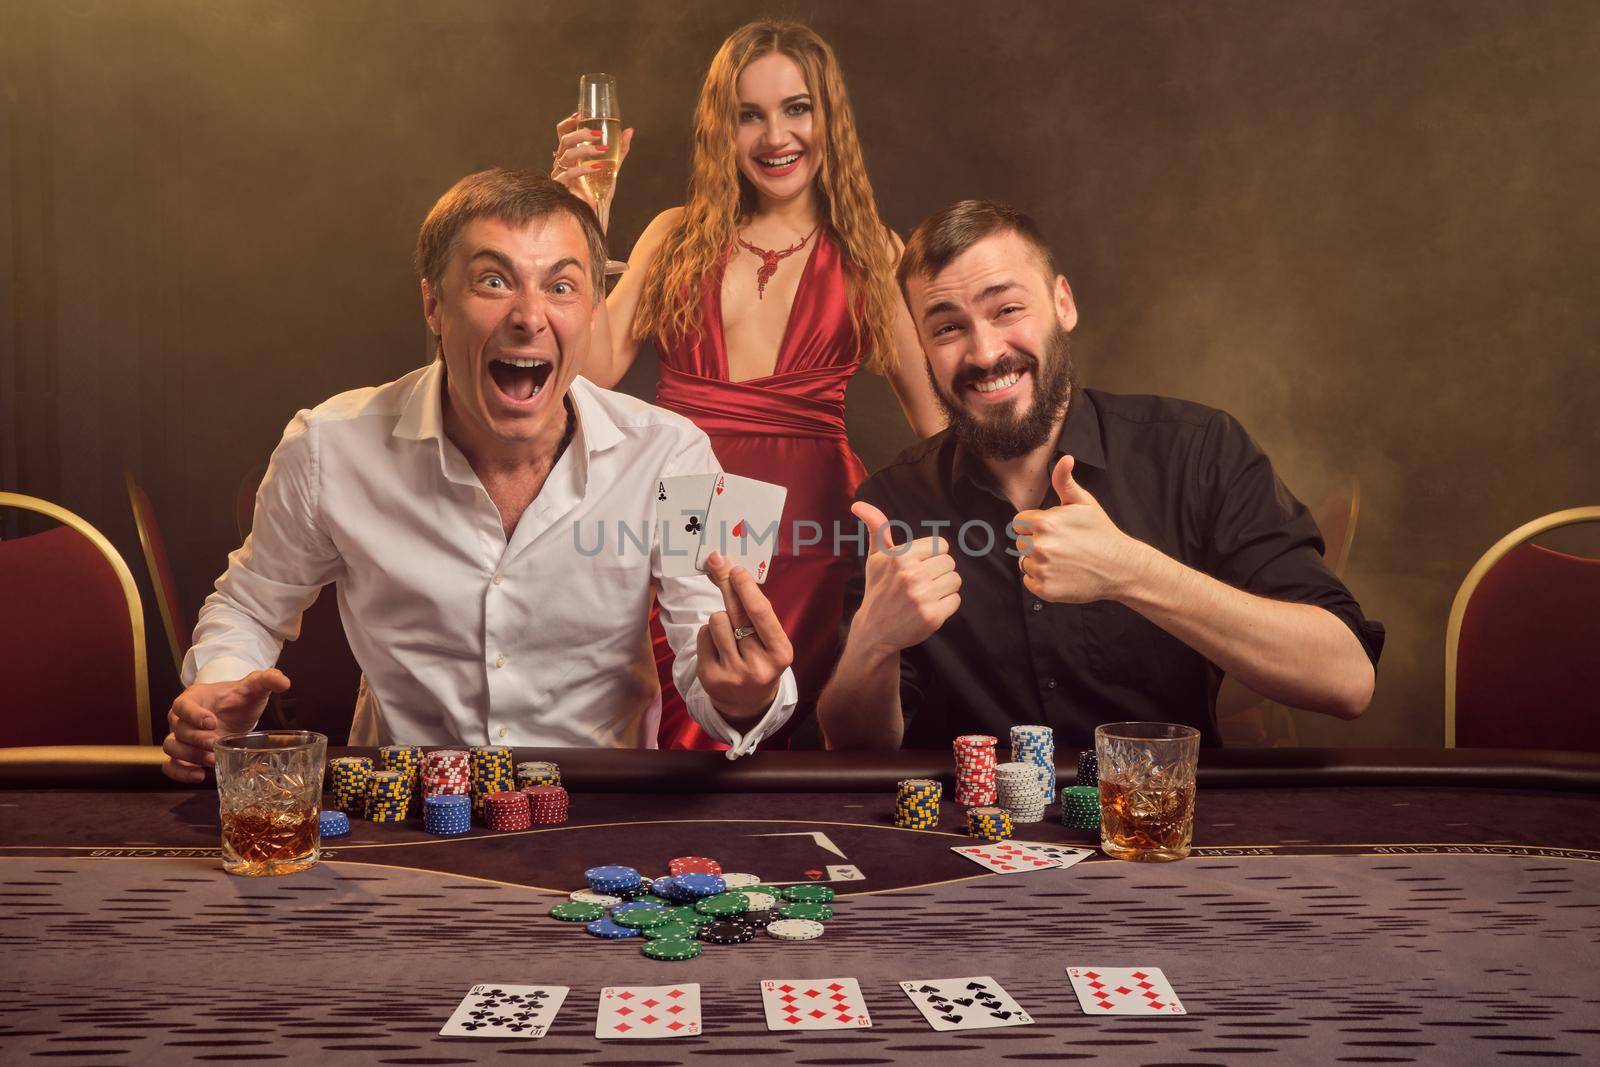 Two wealthy friends and beautiful maiden are playing poker at casino. They are rejoicing their win, smiling and looking at the camera while posing at the table against a yellow backlight on smoke background. Cards, chips, money, gambling, entertainment concept.